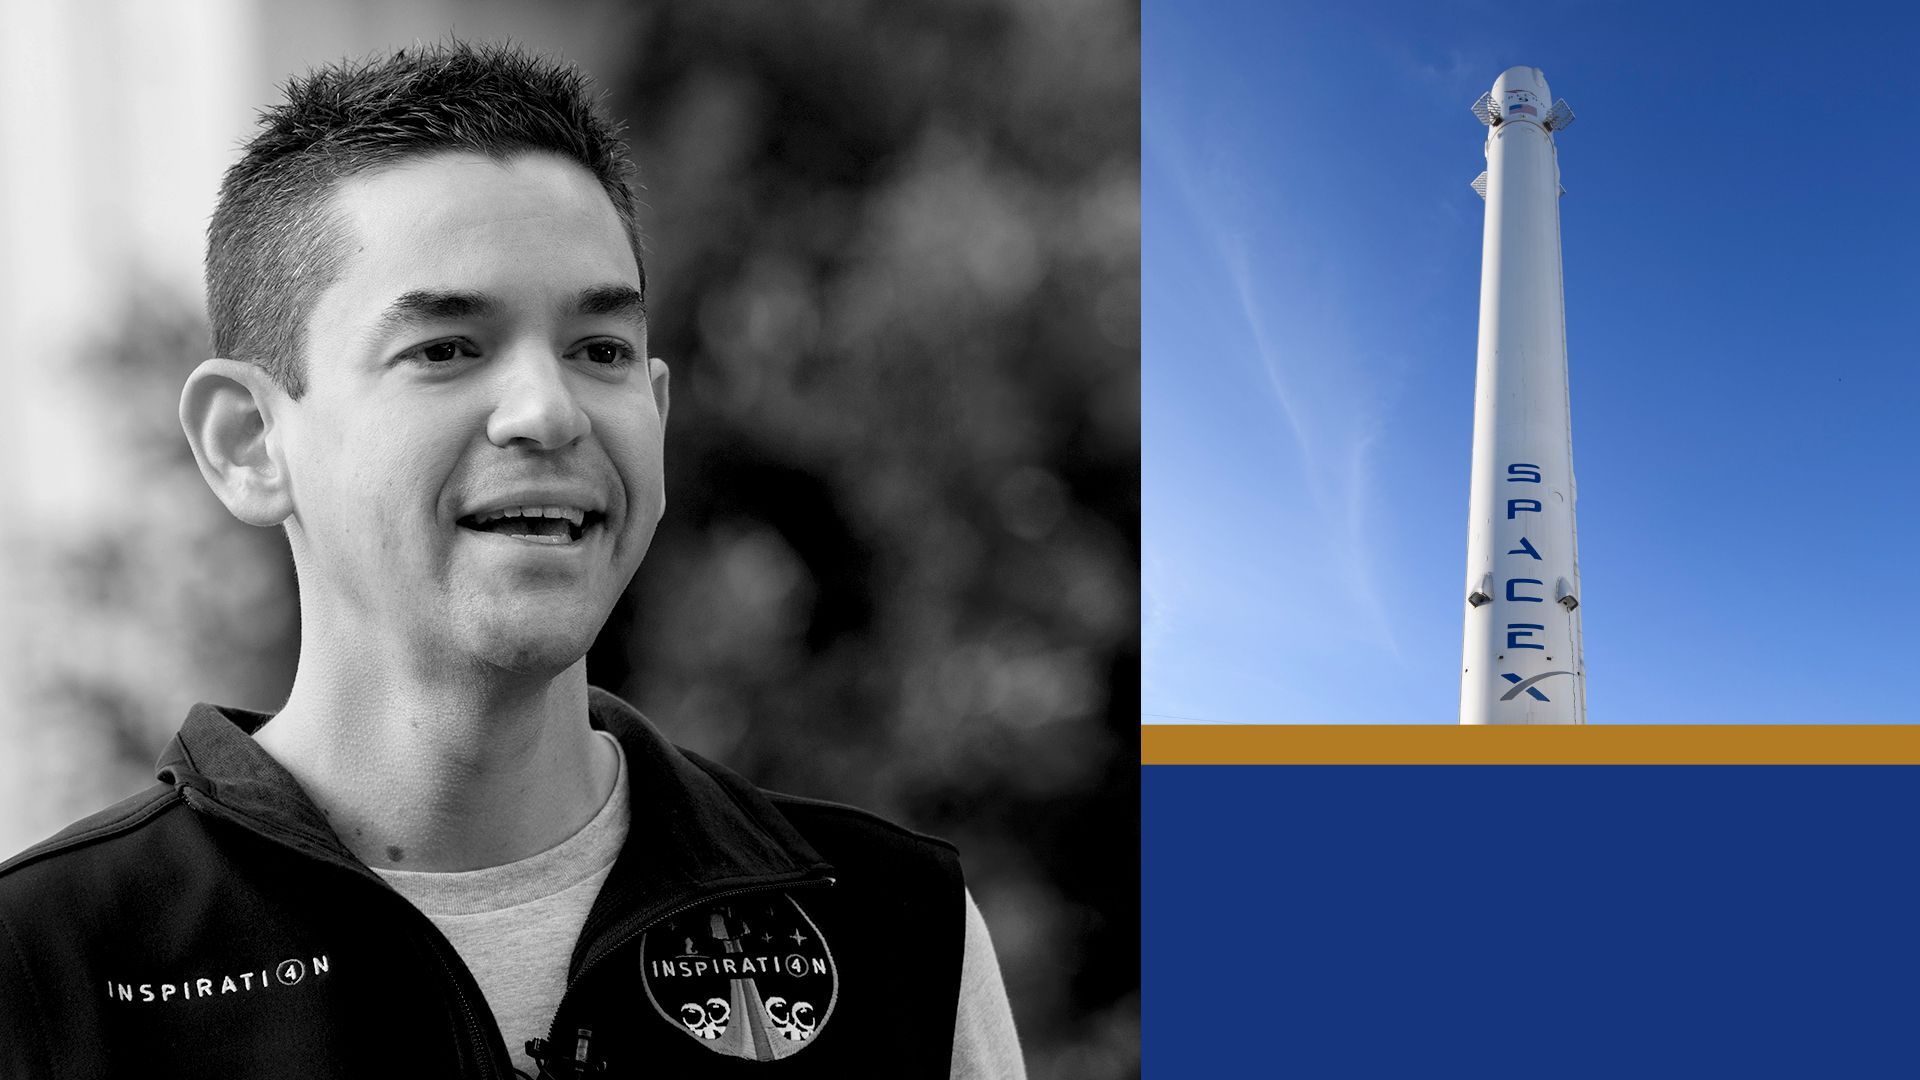 Photo illustration of Jared Isaacman and a SpaceX Falcon 9 rocket